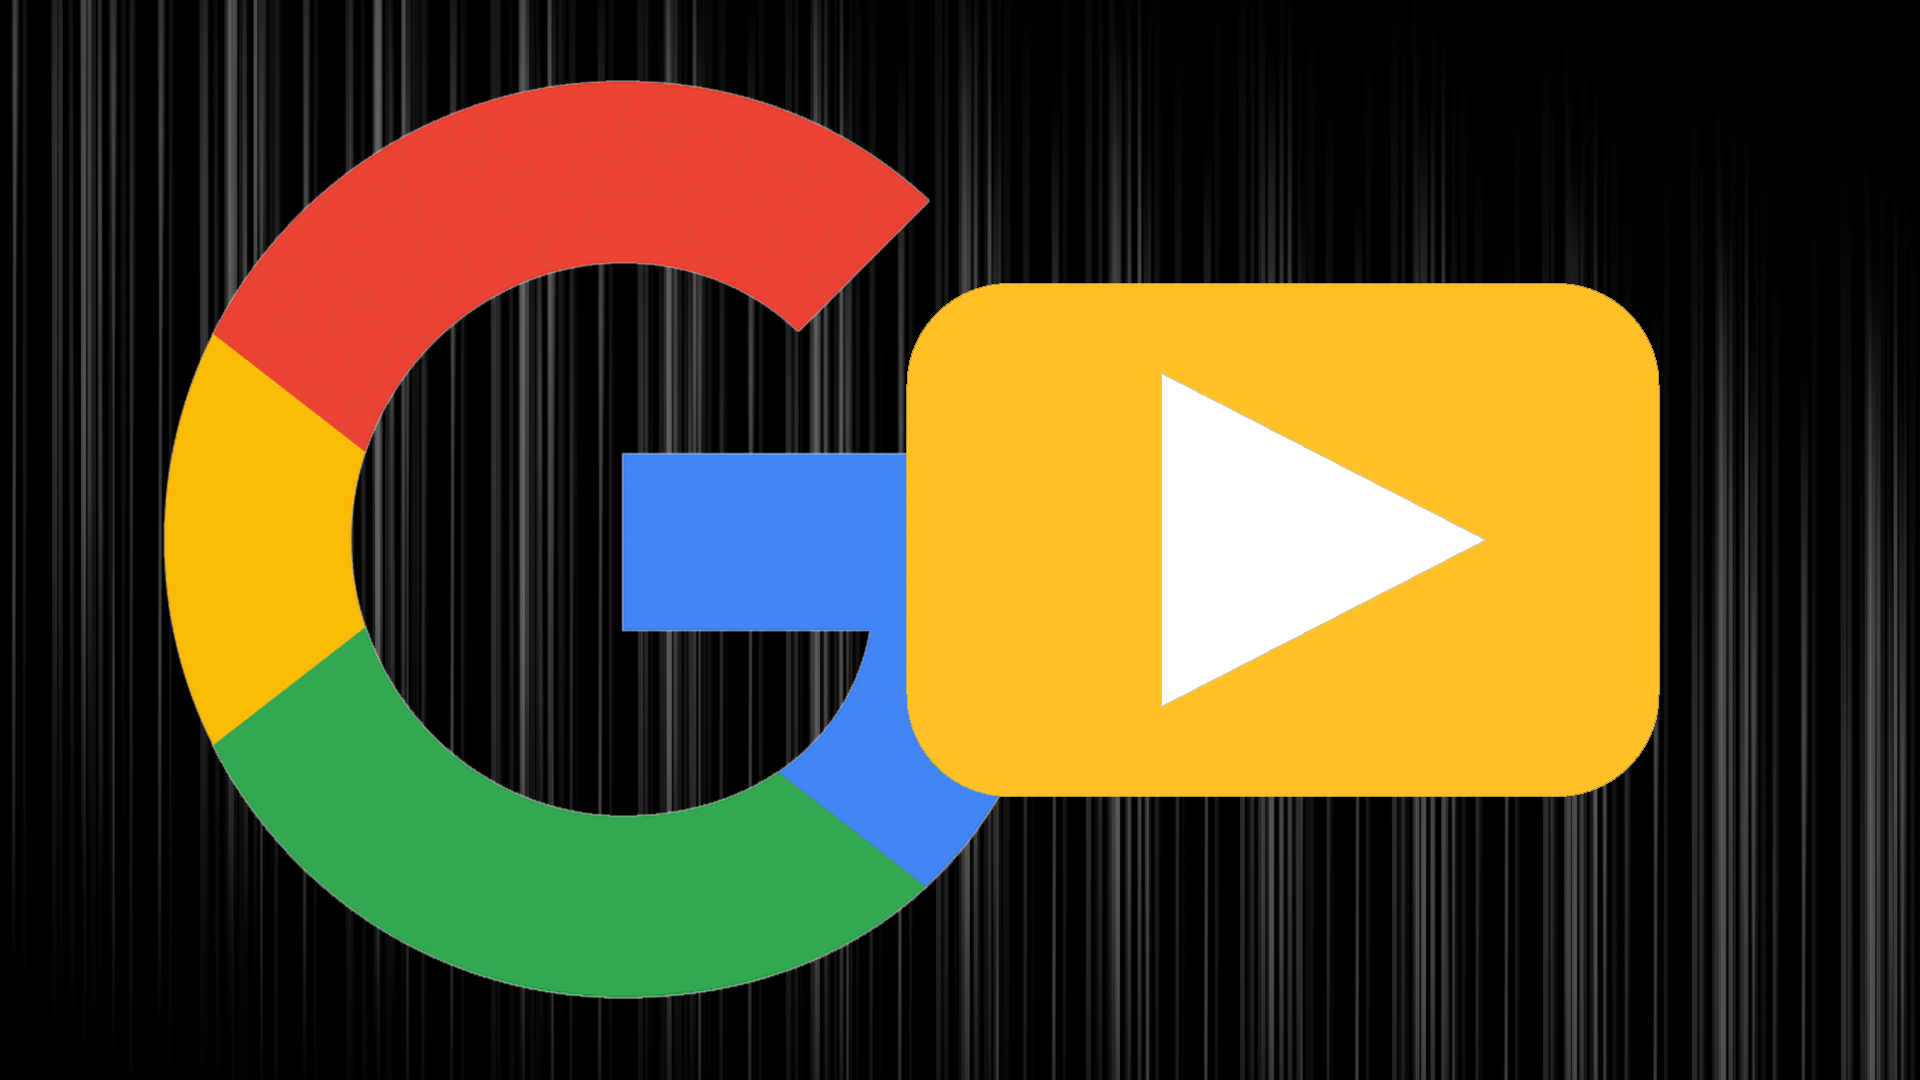 GoogleVideo Logo - Google launches Outstream Ads to boost video reach beyond YouTube